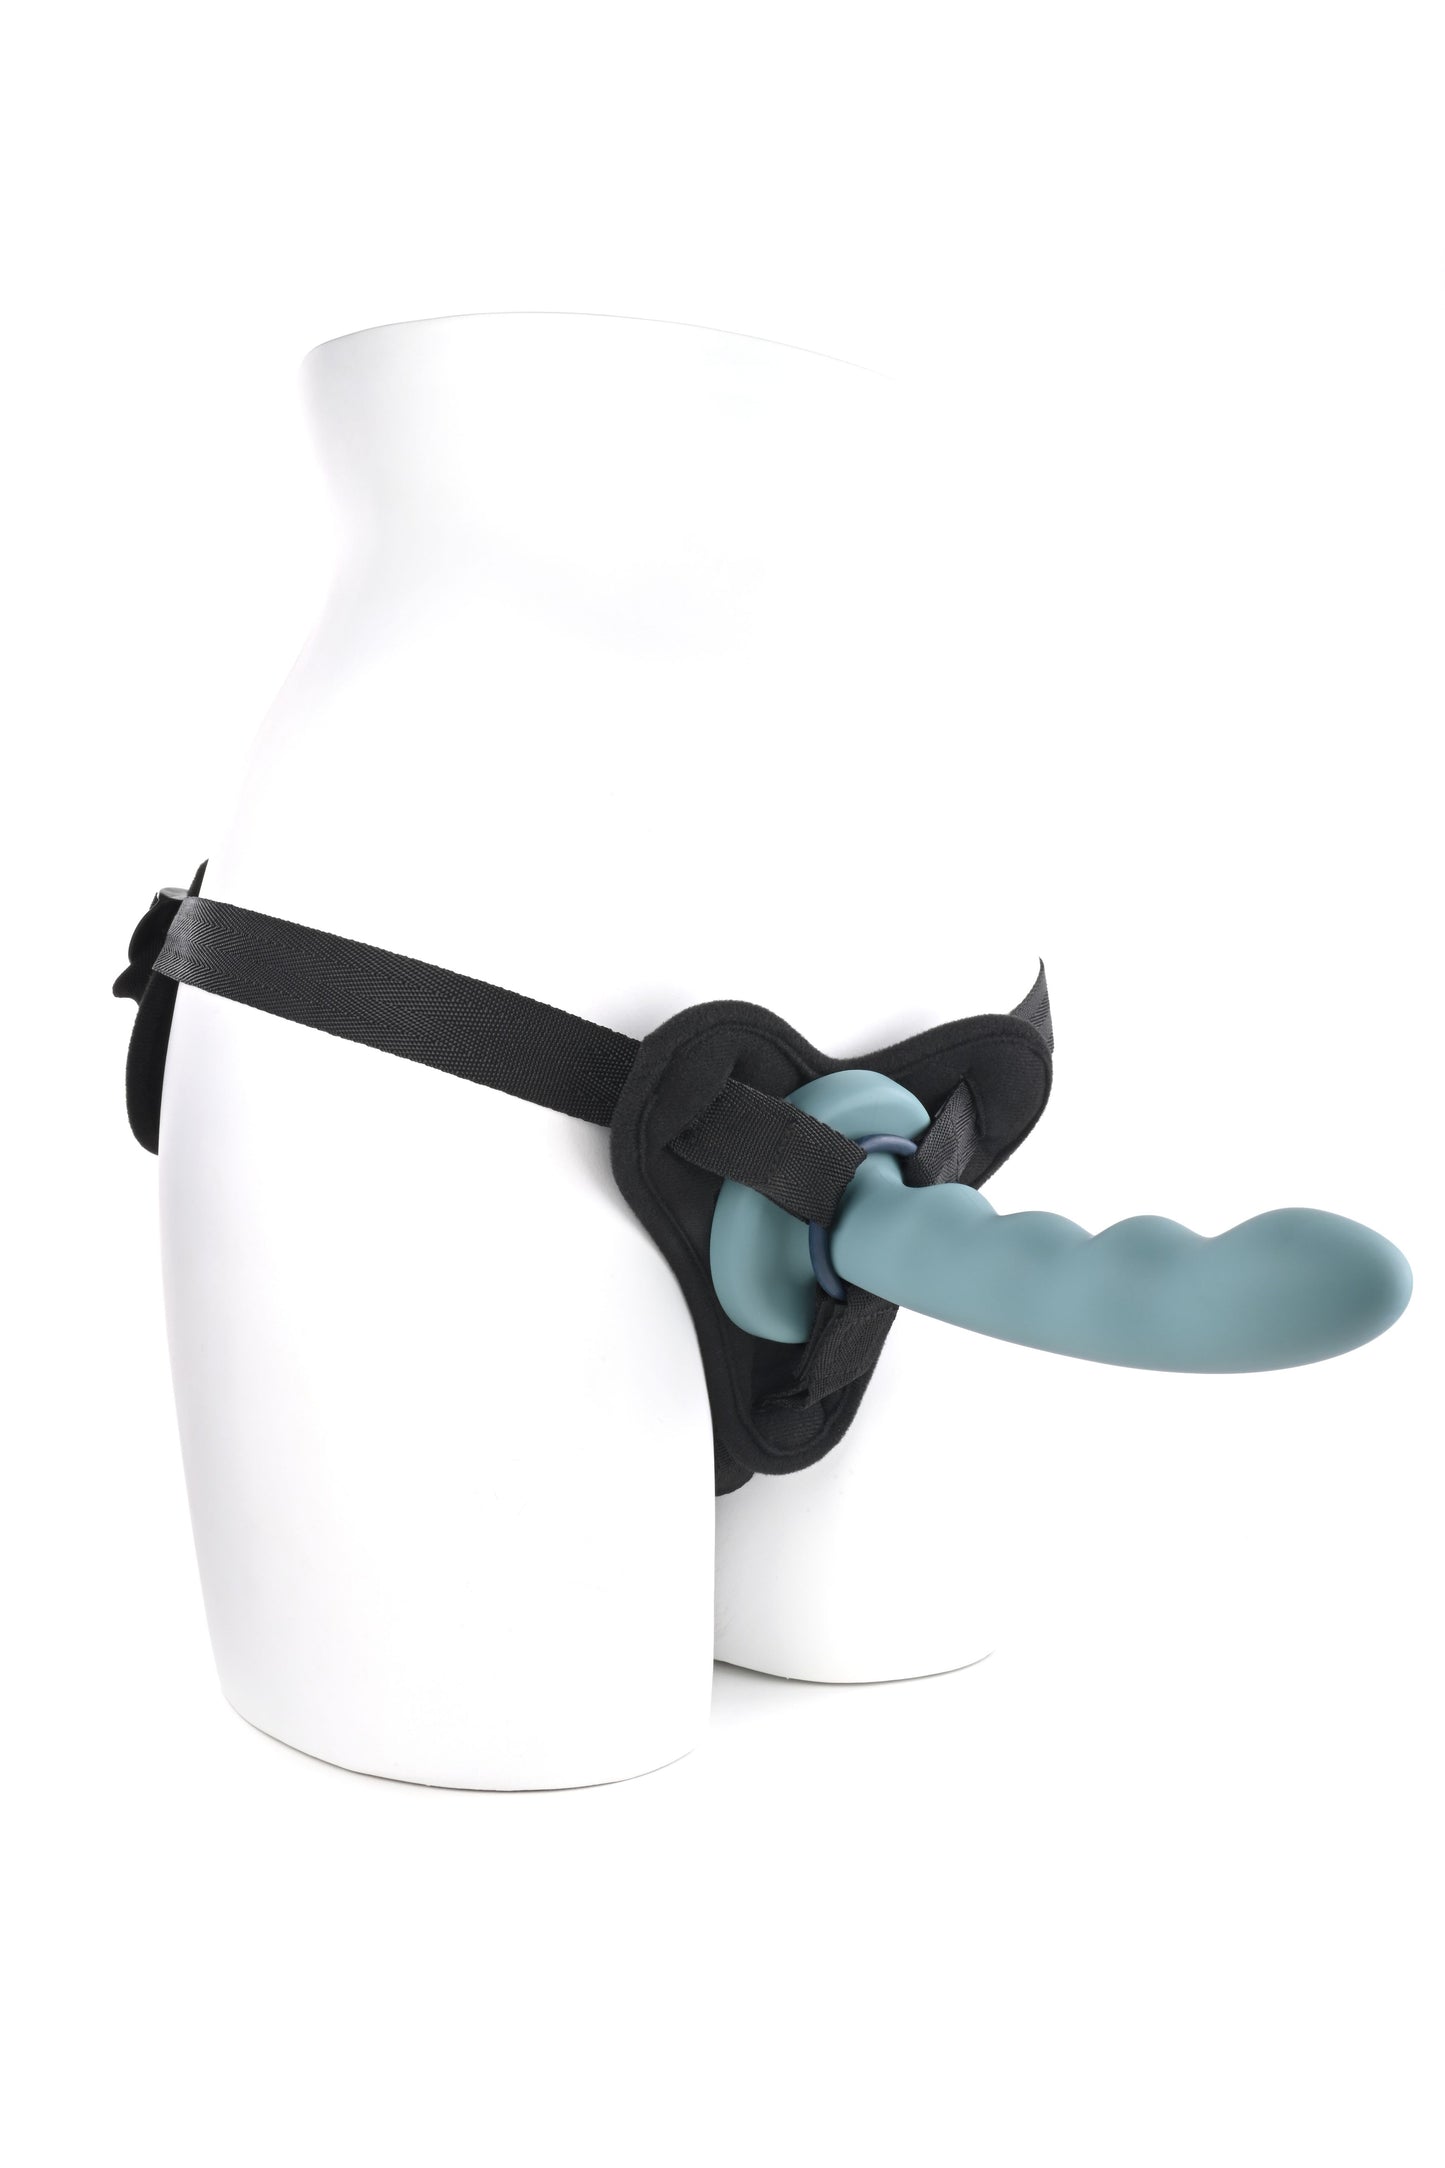 Side angle view of the bottom of a mannequin wearing a harness with a dildo and one of the o-rings to show how it is to be used.